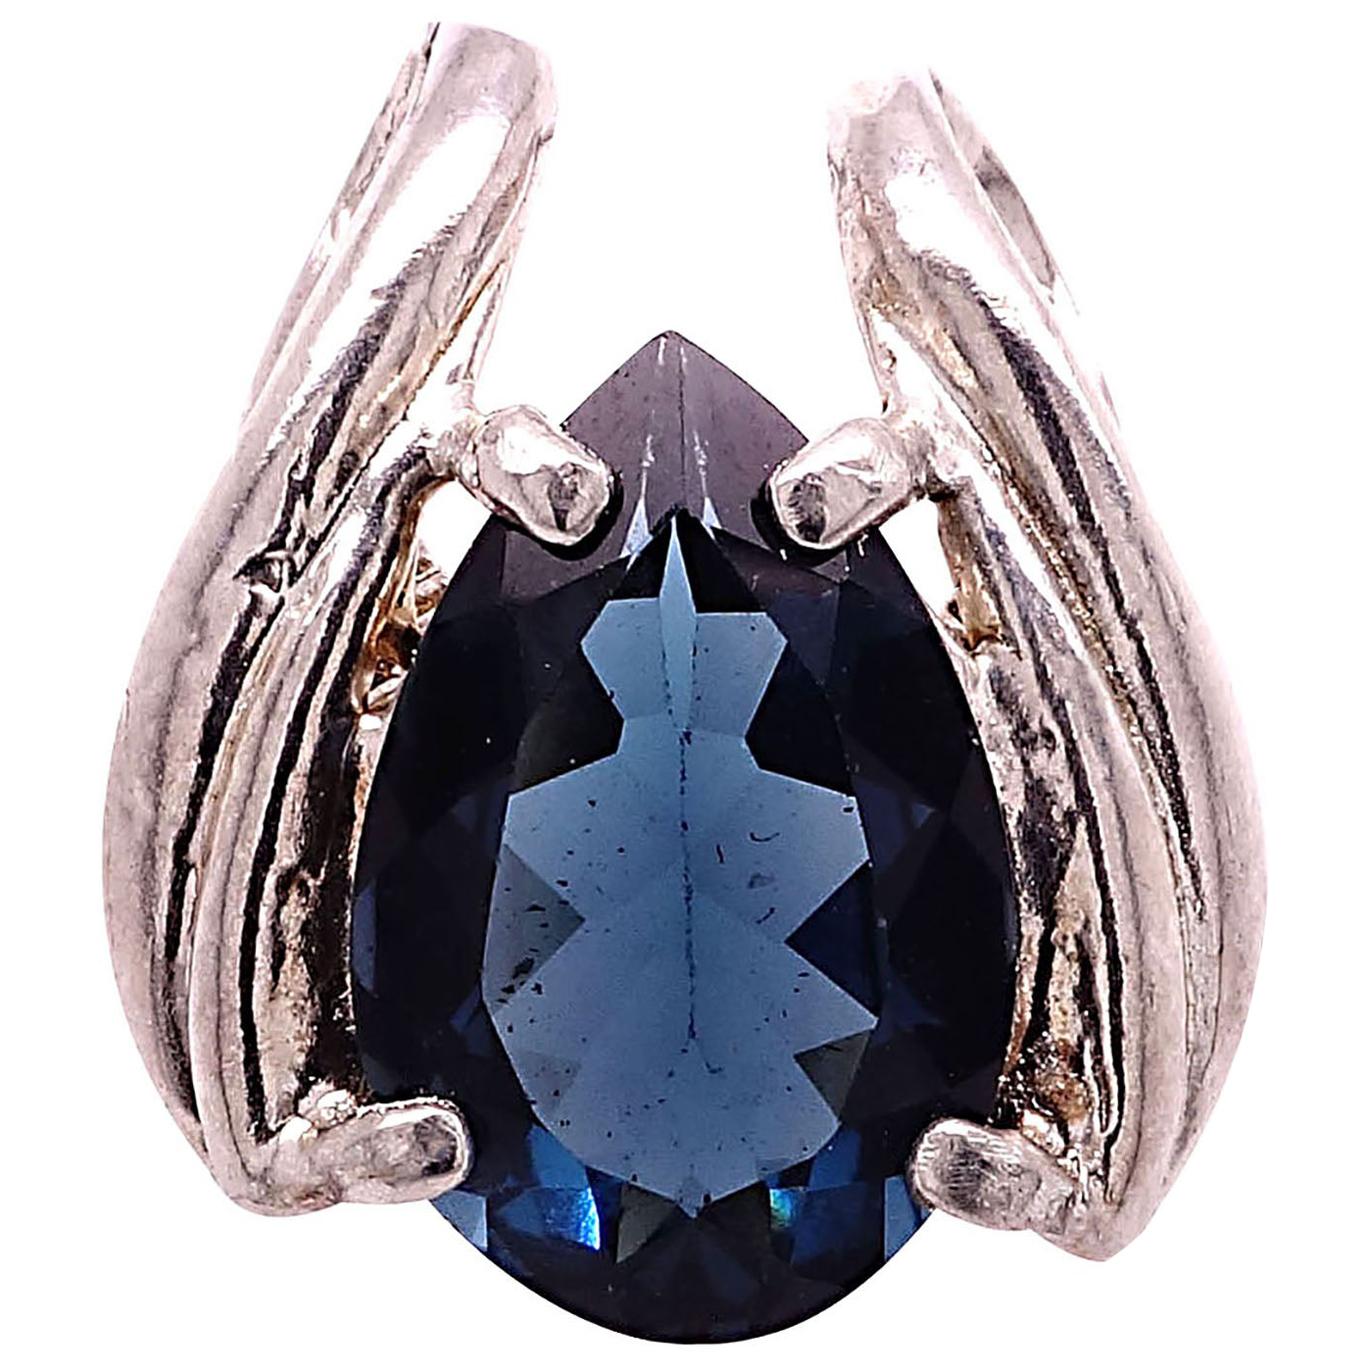 AJD Pear Shaped London Blue Topaz Set in Rounded Sterling Silver Pendant